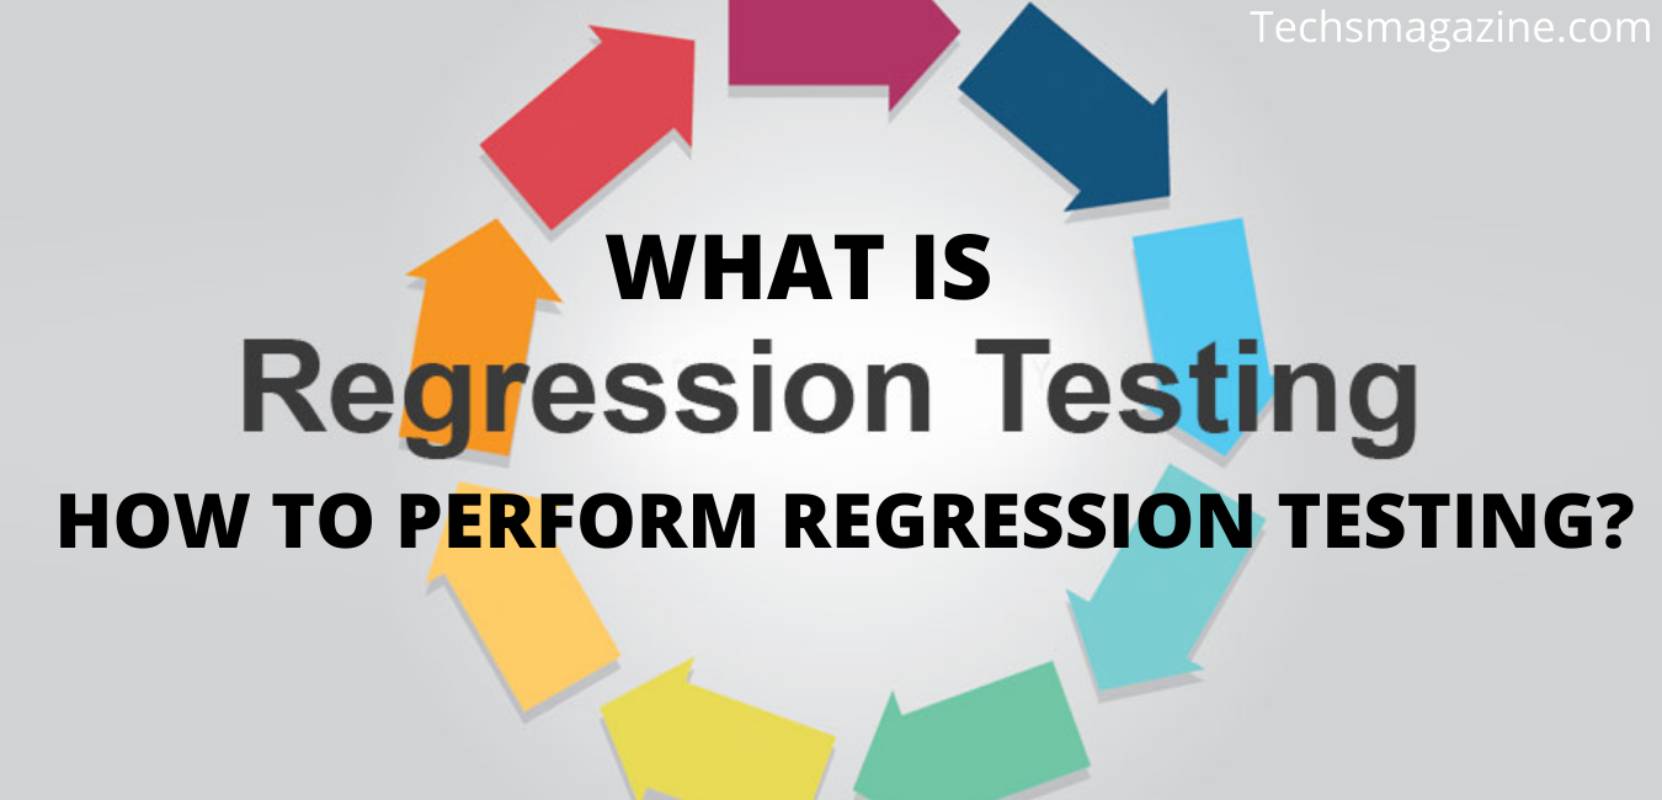 WHAT IS REGRESSION TESTING? How To Perform, Types, Techniques?